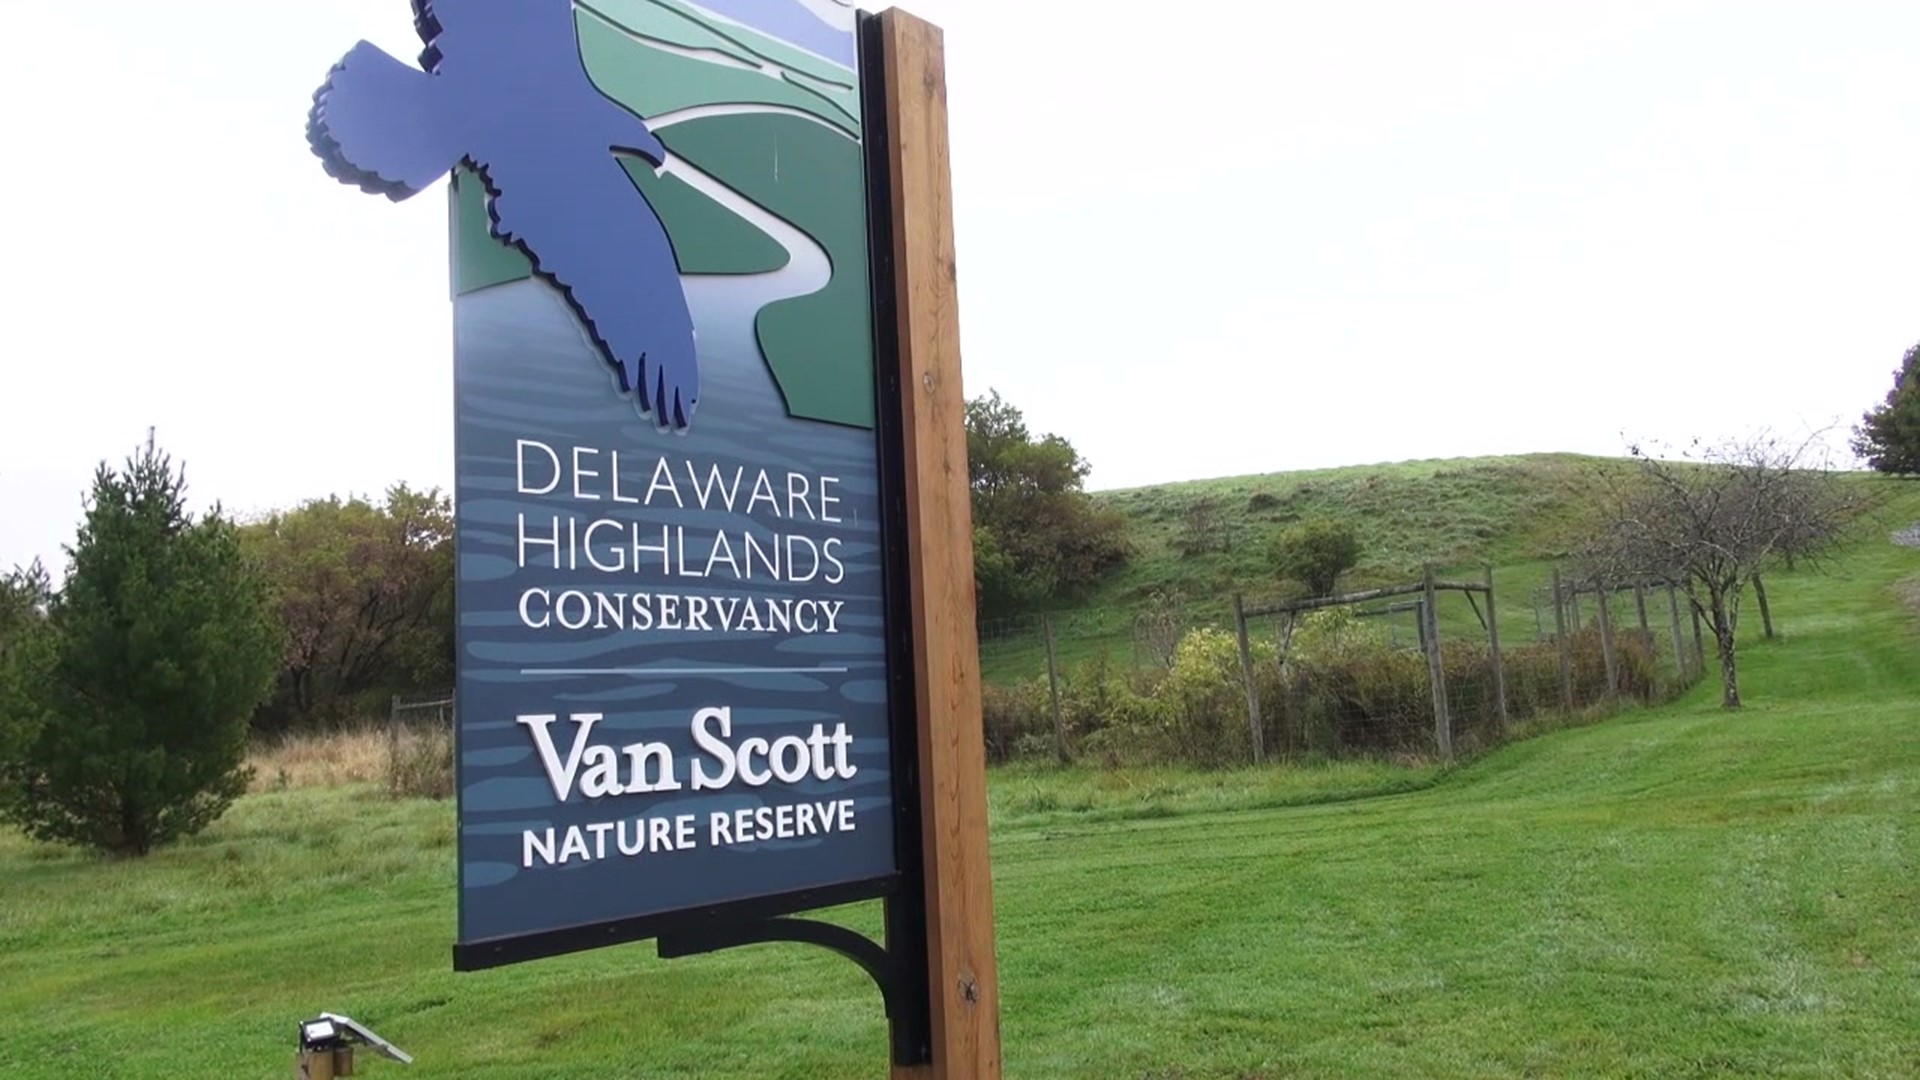 An old dairy farm that hasn't been operable in years is now the home of a nature reserve, featuring more than 100 acres of walking trails and scenic views.